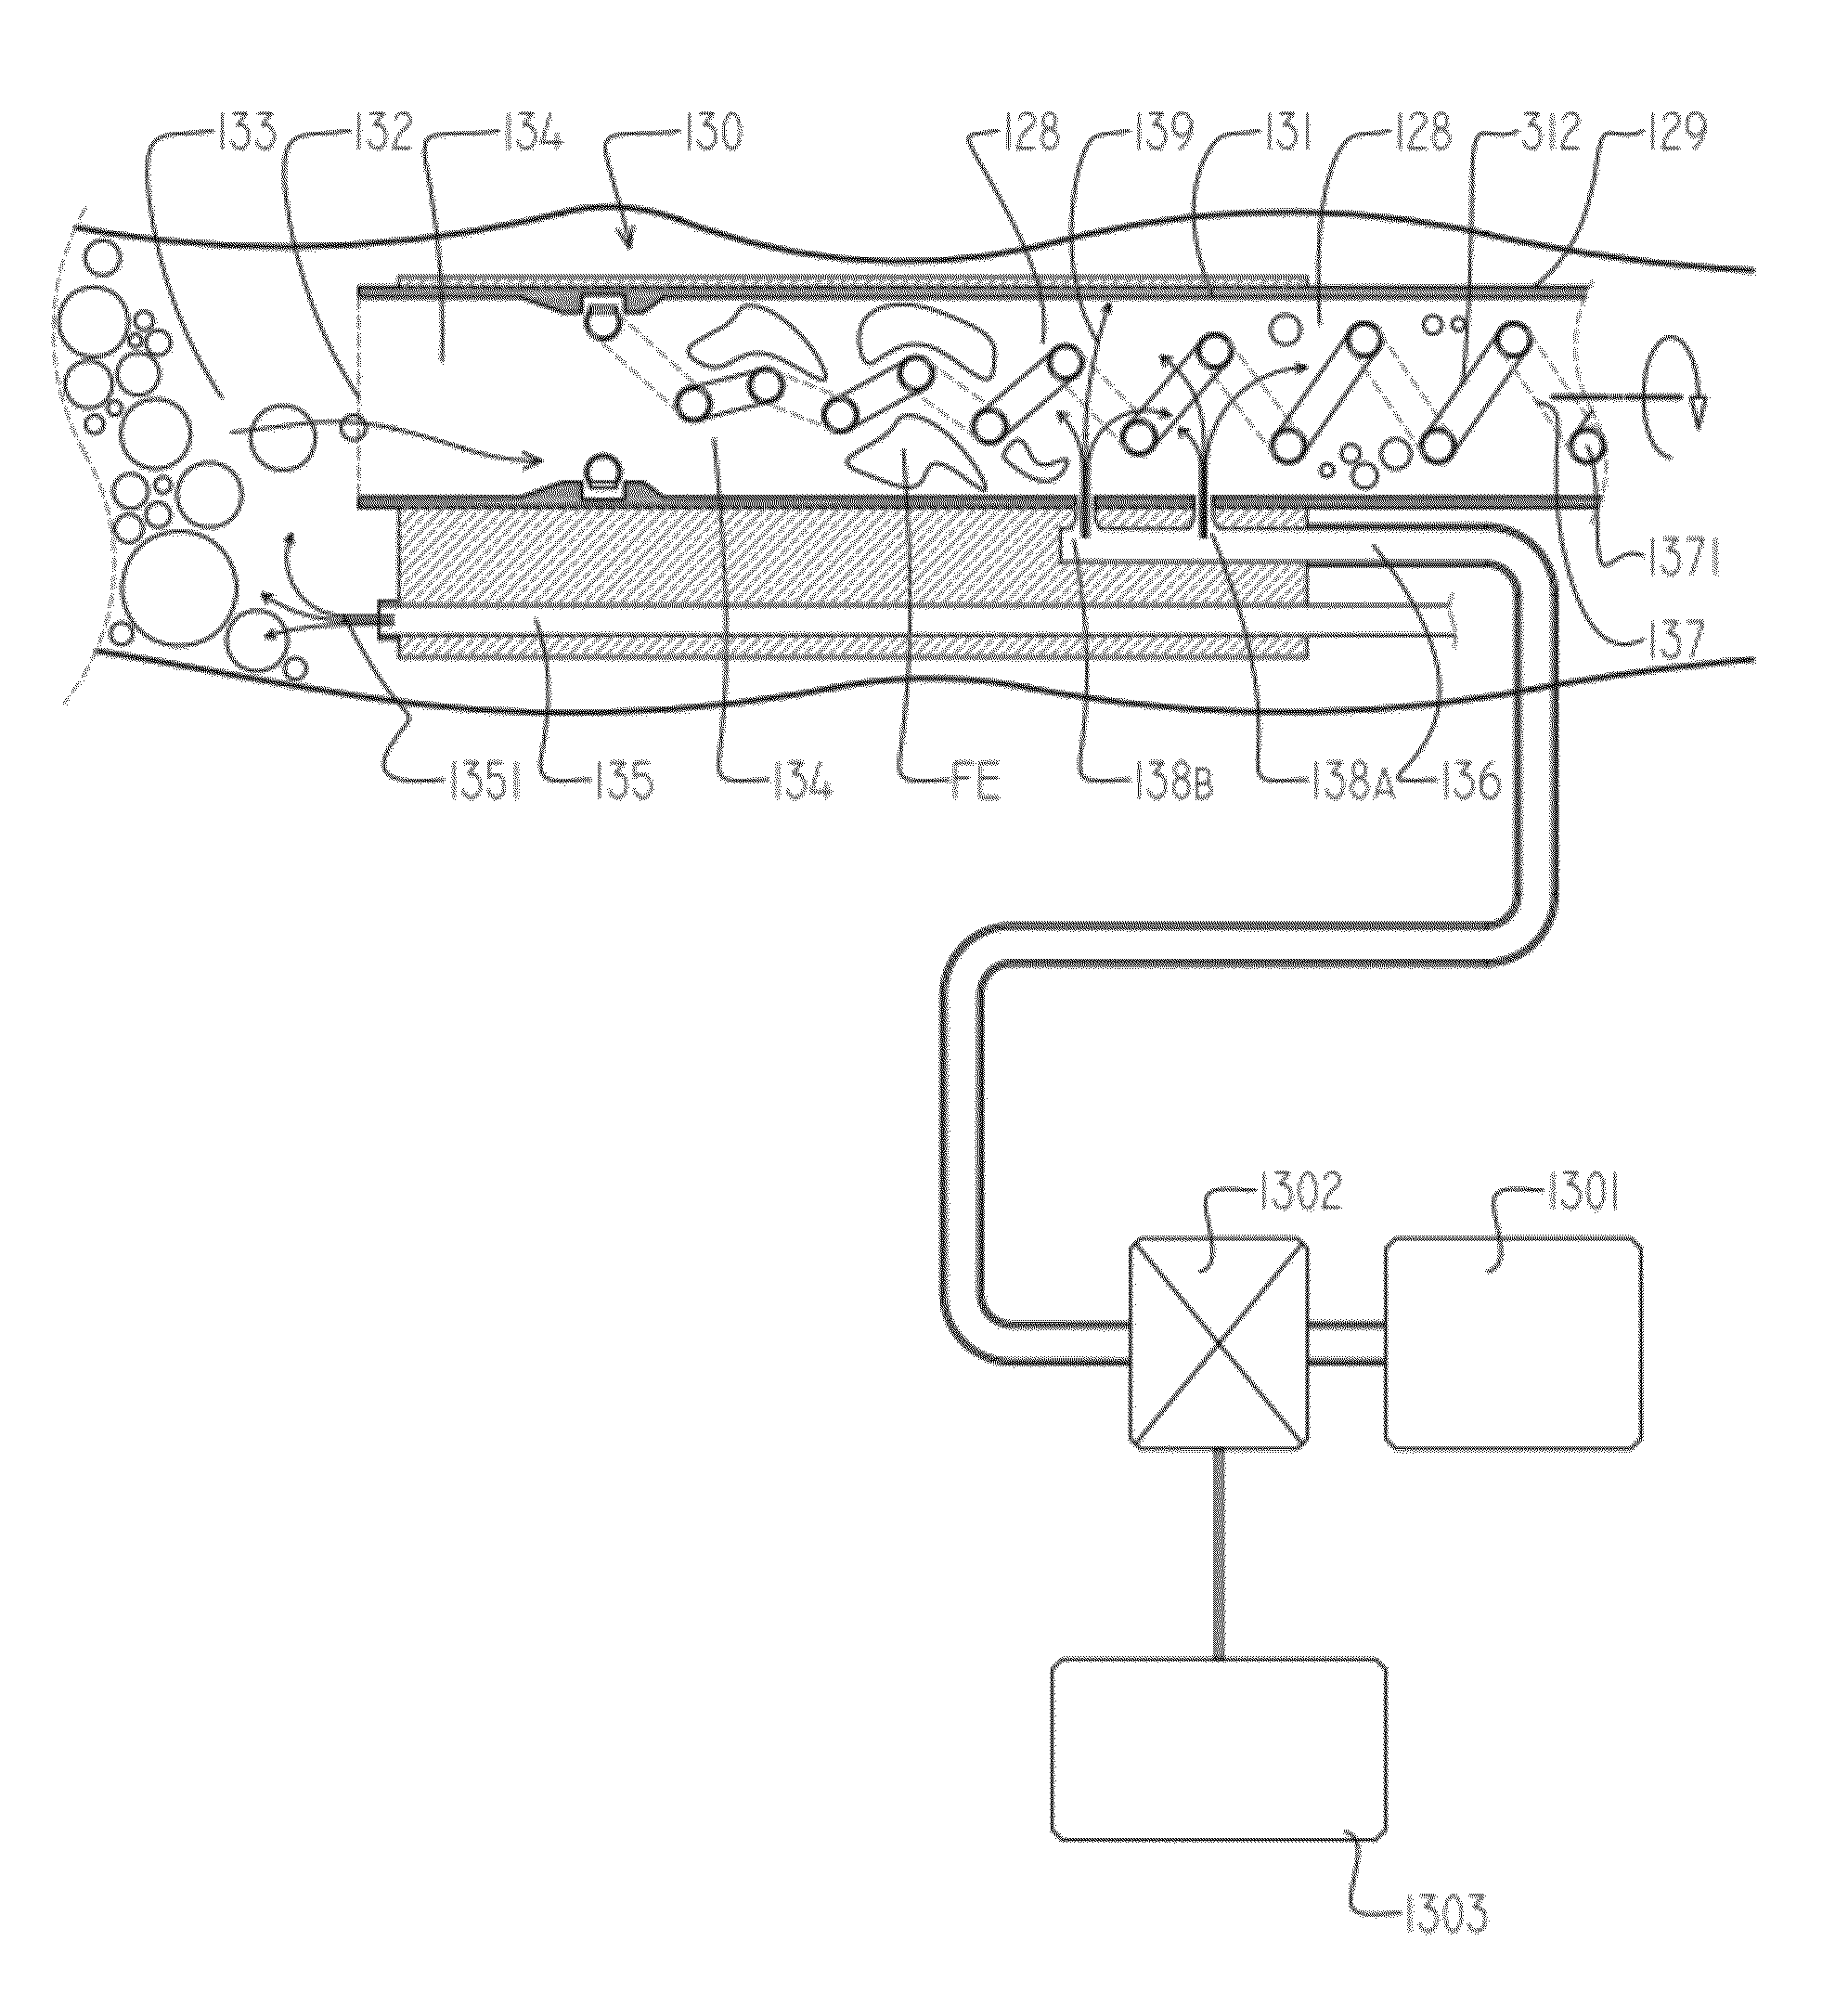 Systems and methods for cleaning body cavities